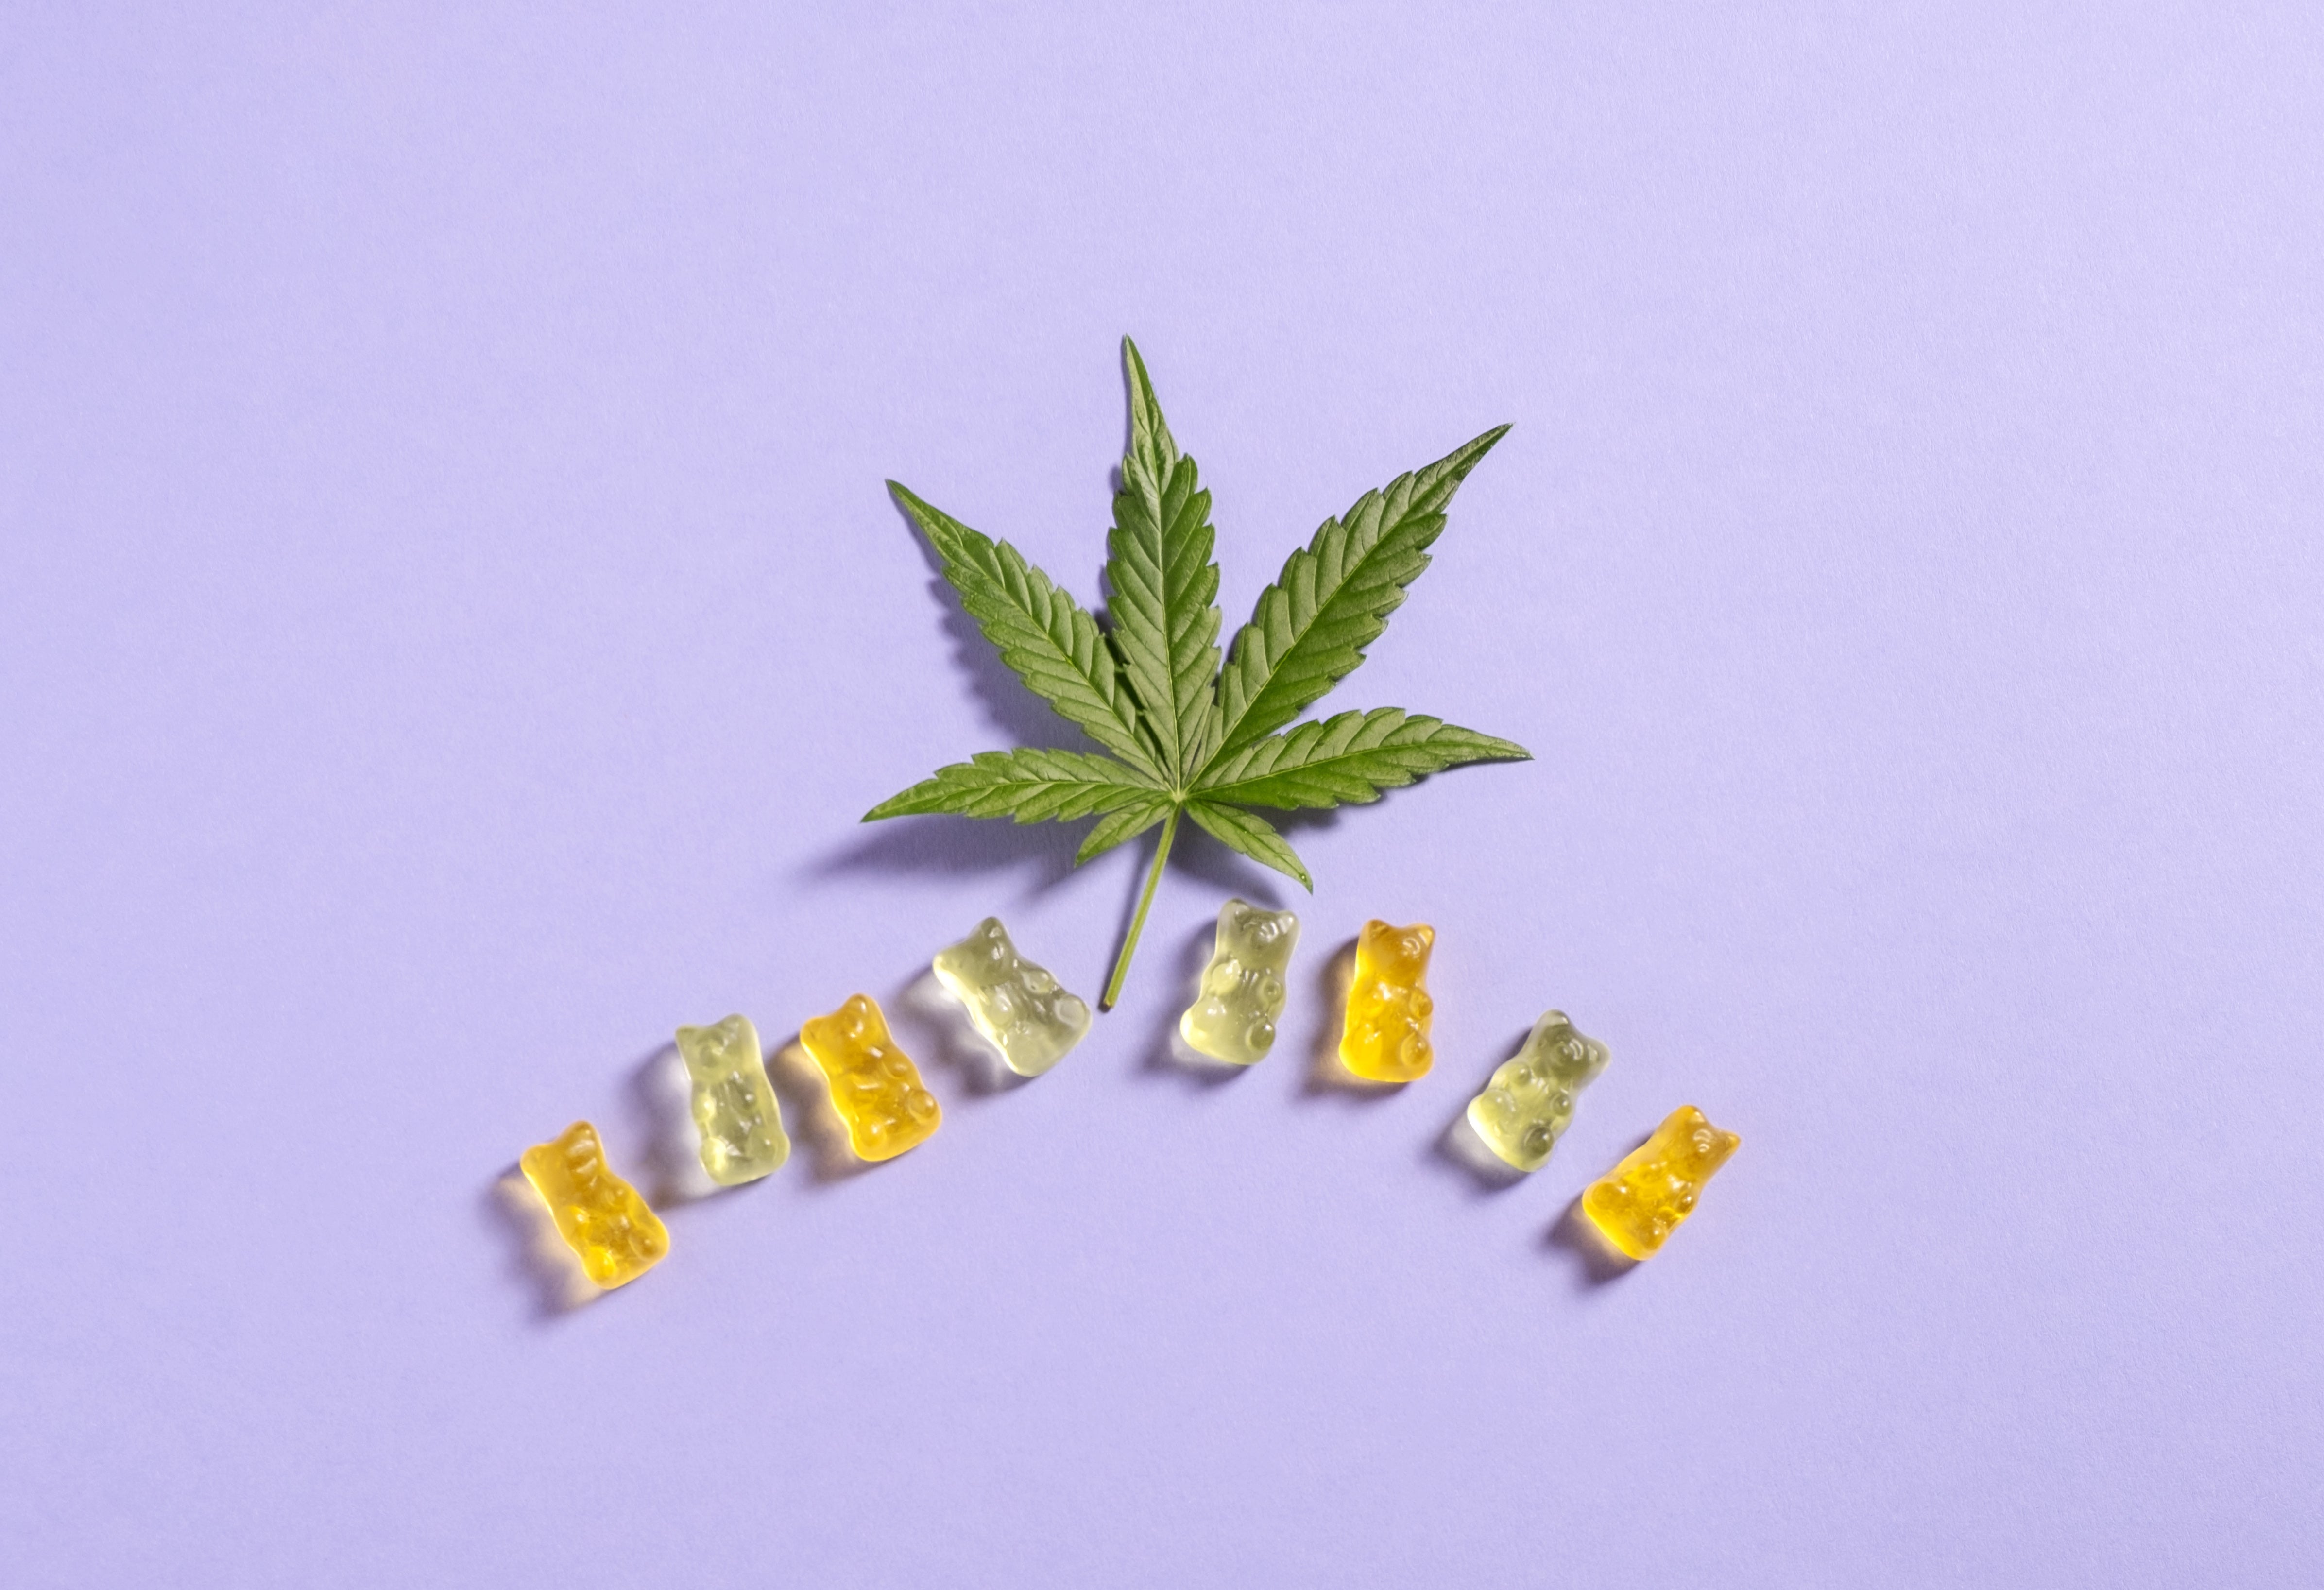 Weed gummies are laid out in a row beneath a cannabis flower leaf on a purple surface.